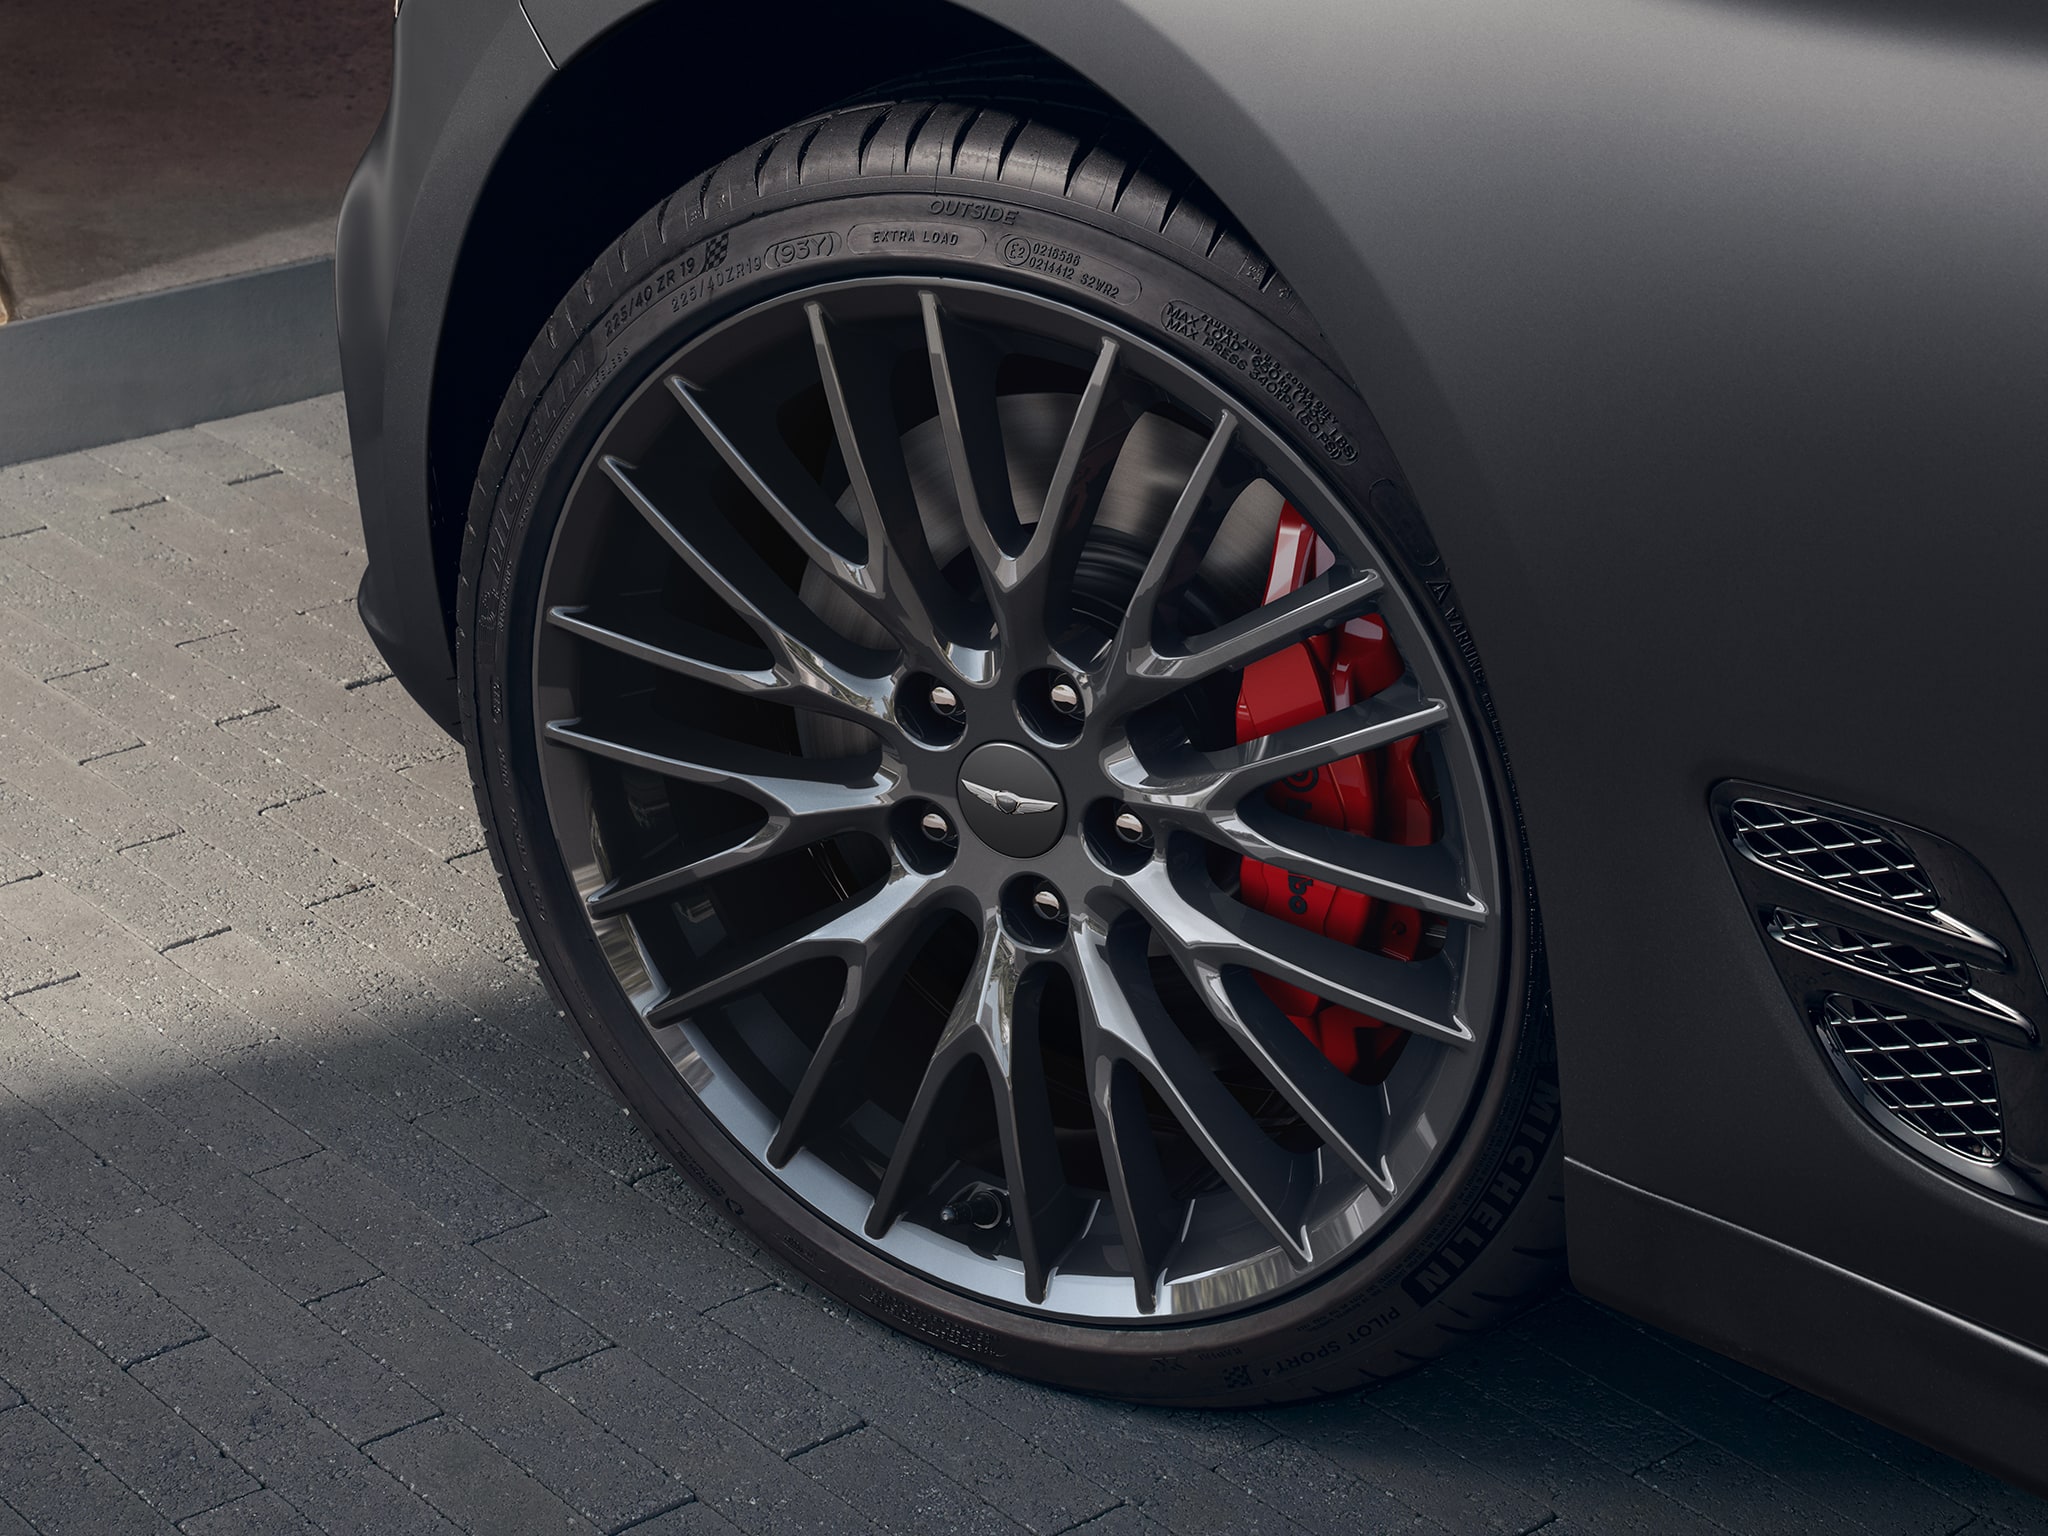 2022 Genesis G70 with available Brembo brakes.